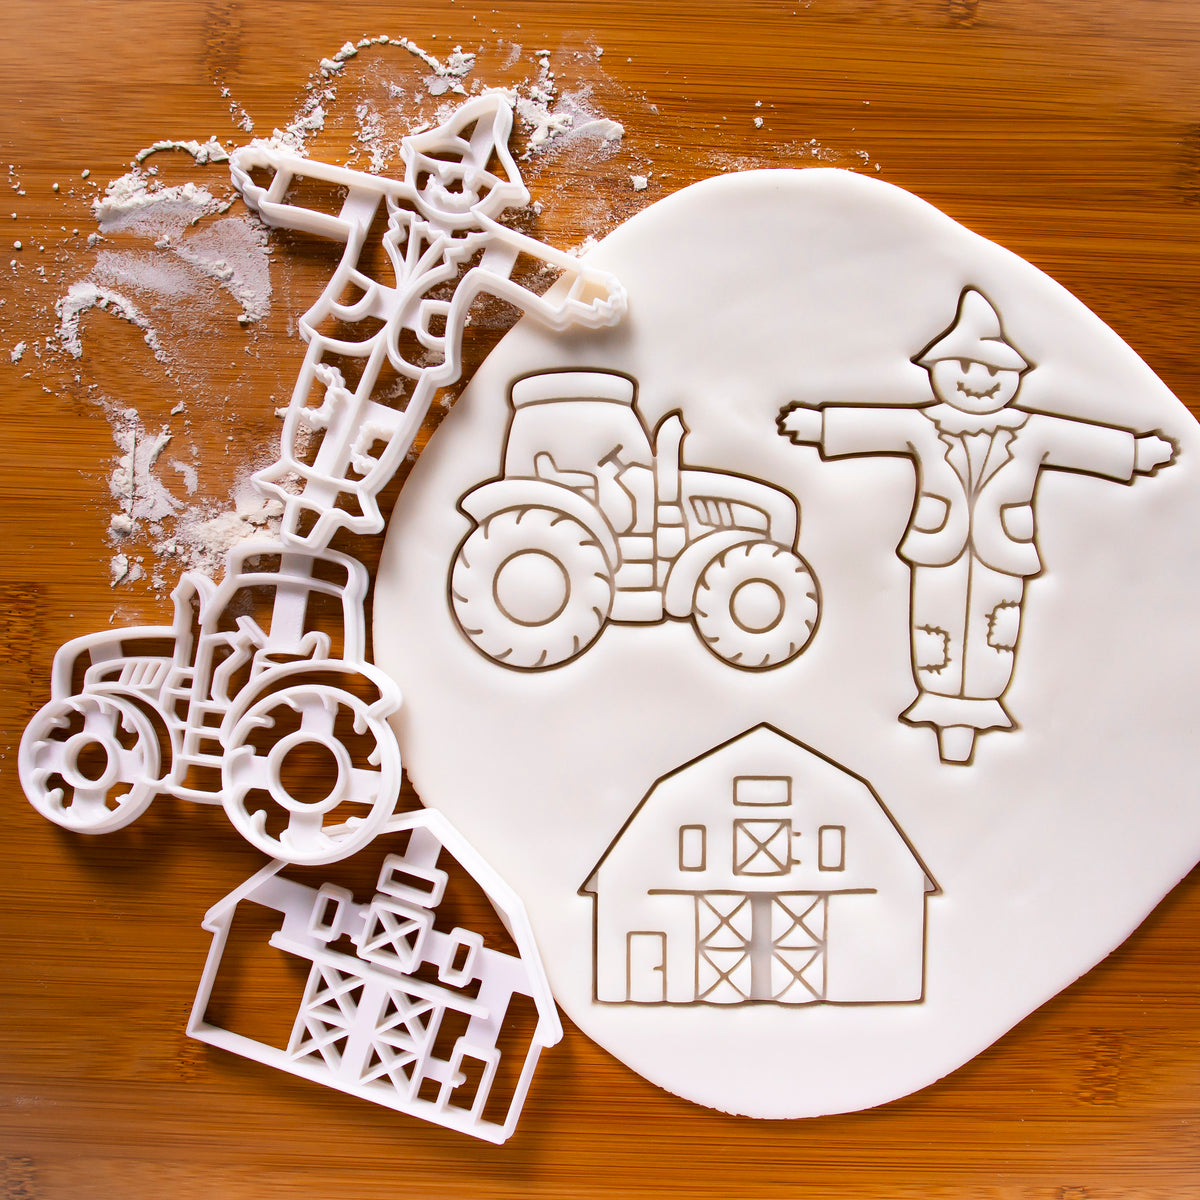 Set of 3 Farming Cookie Cutters (Barnhouse, Scarecrow, & Tractor)